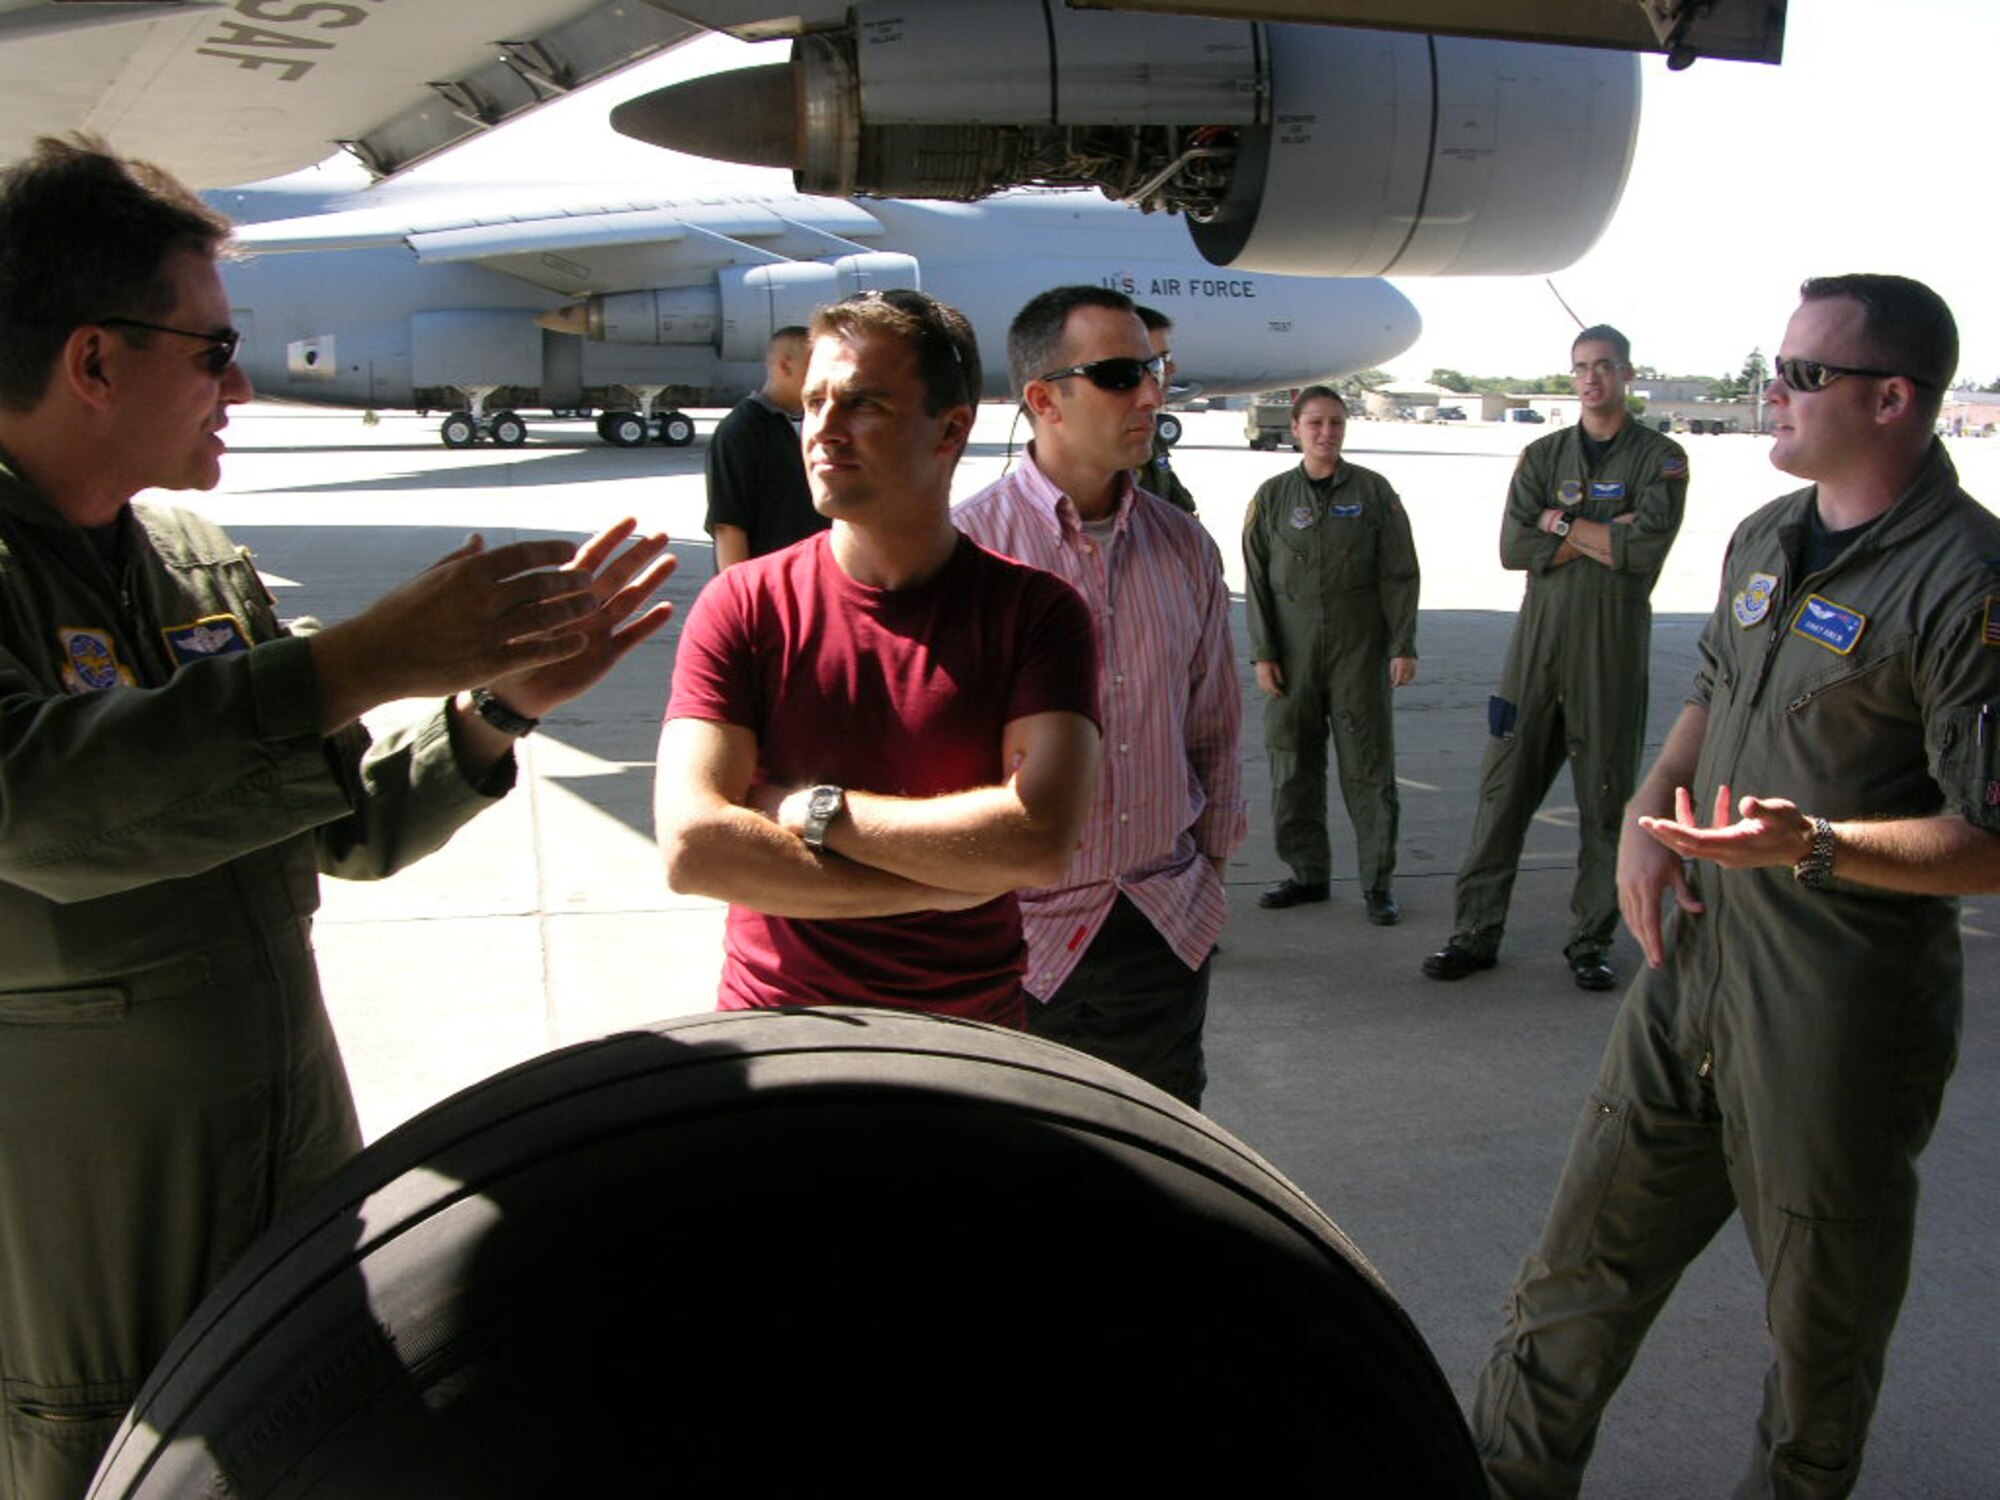 WESTOVER AIR RESERVE BASE, Mass. -- Air Force reservist Master Sgt. Art Dapaixao, left, explains the landing gear of a C-5 Galaxy to Maj. Jorge Barraso, a Spanish Air Force pilot, while Capt. Corey Aiken, a 337th Airlift Squadron pilot, explains the Galaxy to Maj. Manuel Alcaide, also a Spanish Air Force pilot. Captain Aiken and the other 337th crew members showed the entire huge airlifter to the Spanish pilots, who were visiting Westover Sept. 22 as part of airlifting United Nations delegates from Spain to New York City. (U.S. Air Force photo by Tech. Sgt. Andrew Biscoe)